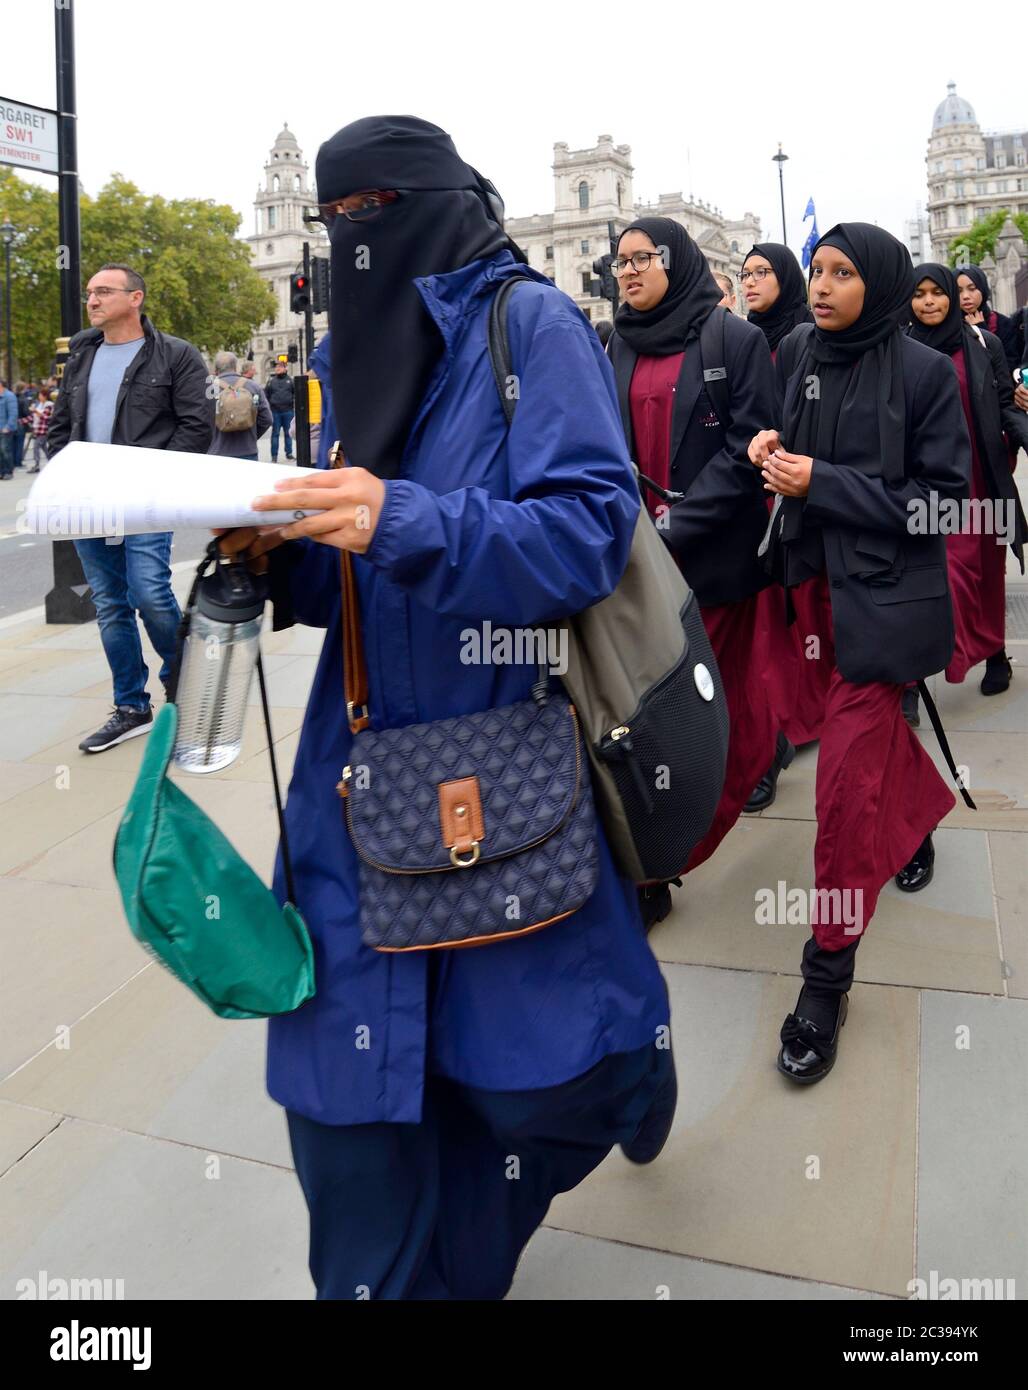 Niqab Uk High Resolution Stock Photography and Images - Alamy